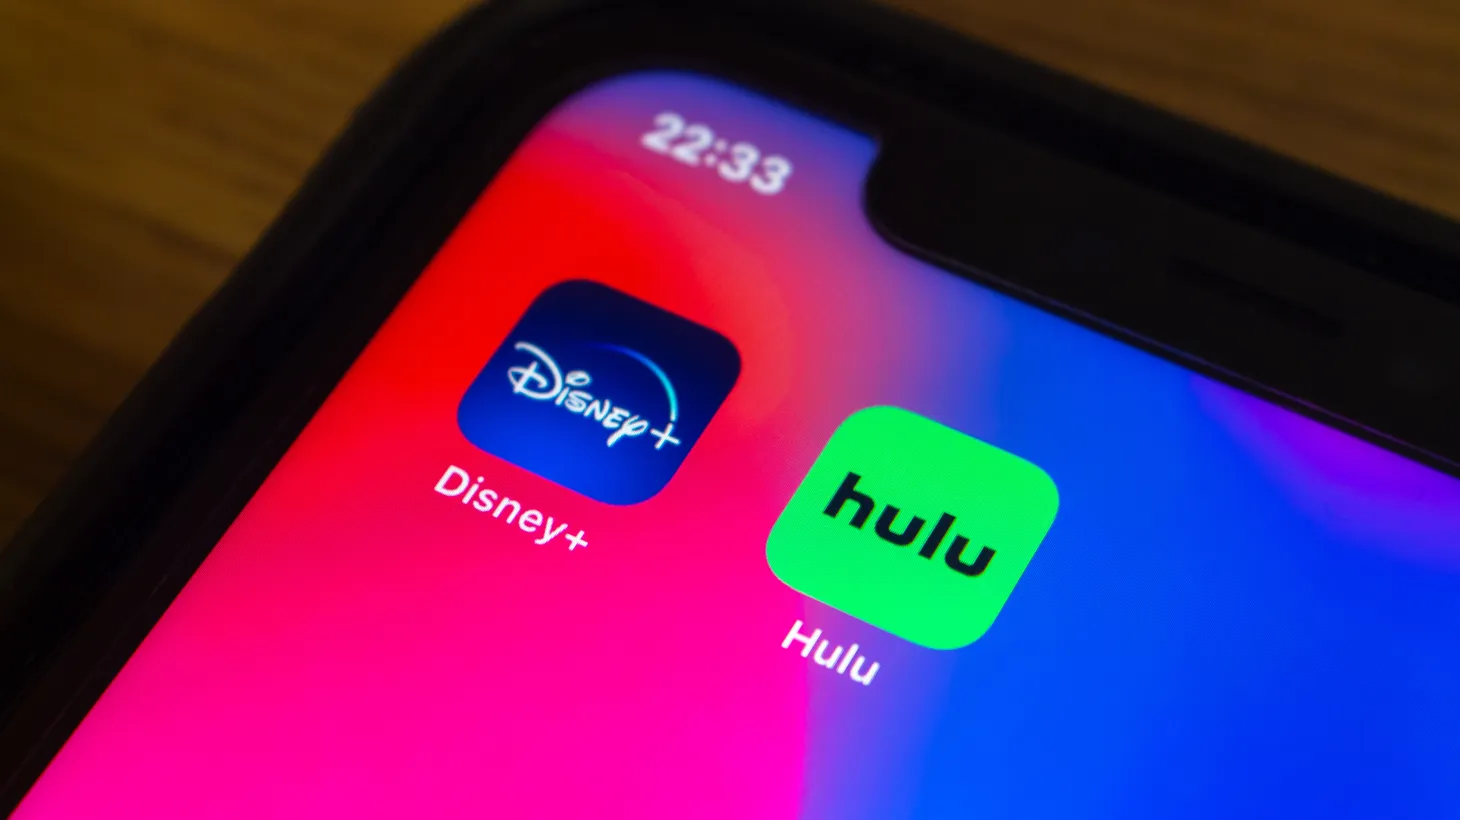 “[Disney] can suck all that content that's on Hulu, put it back on Disney+, then sell the shell of Hulu to somebody else like Comcast, and then go our merry way,” says Matt Belloni.